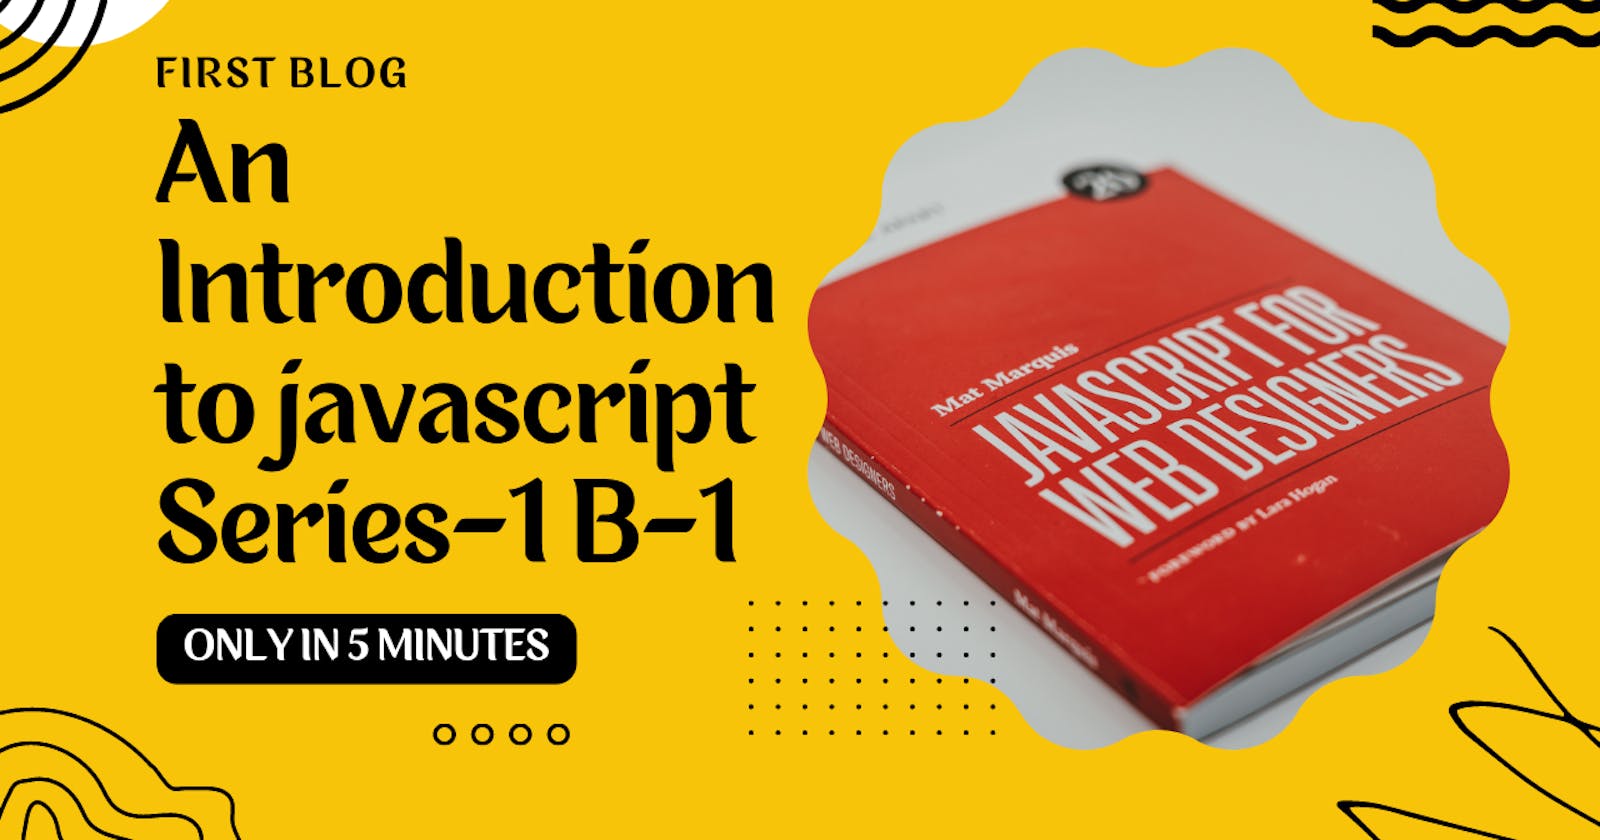 An Introduction to Javascript and some history of javascript  [S-1,B-1]